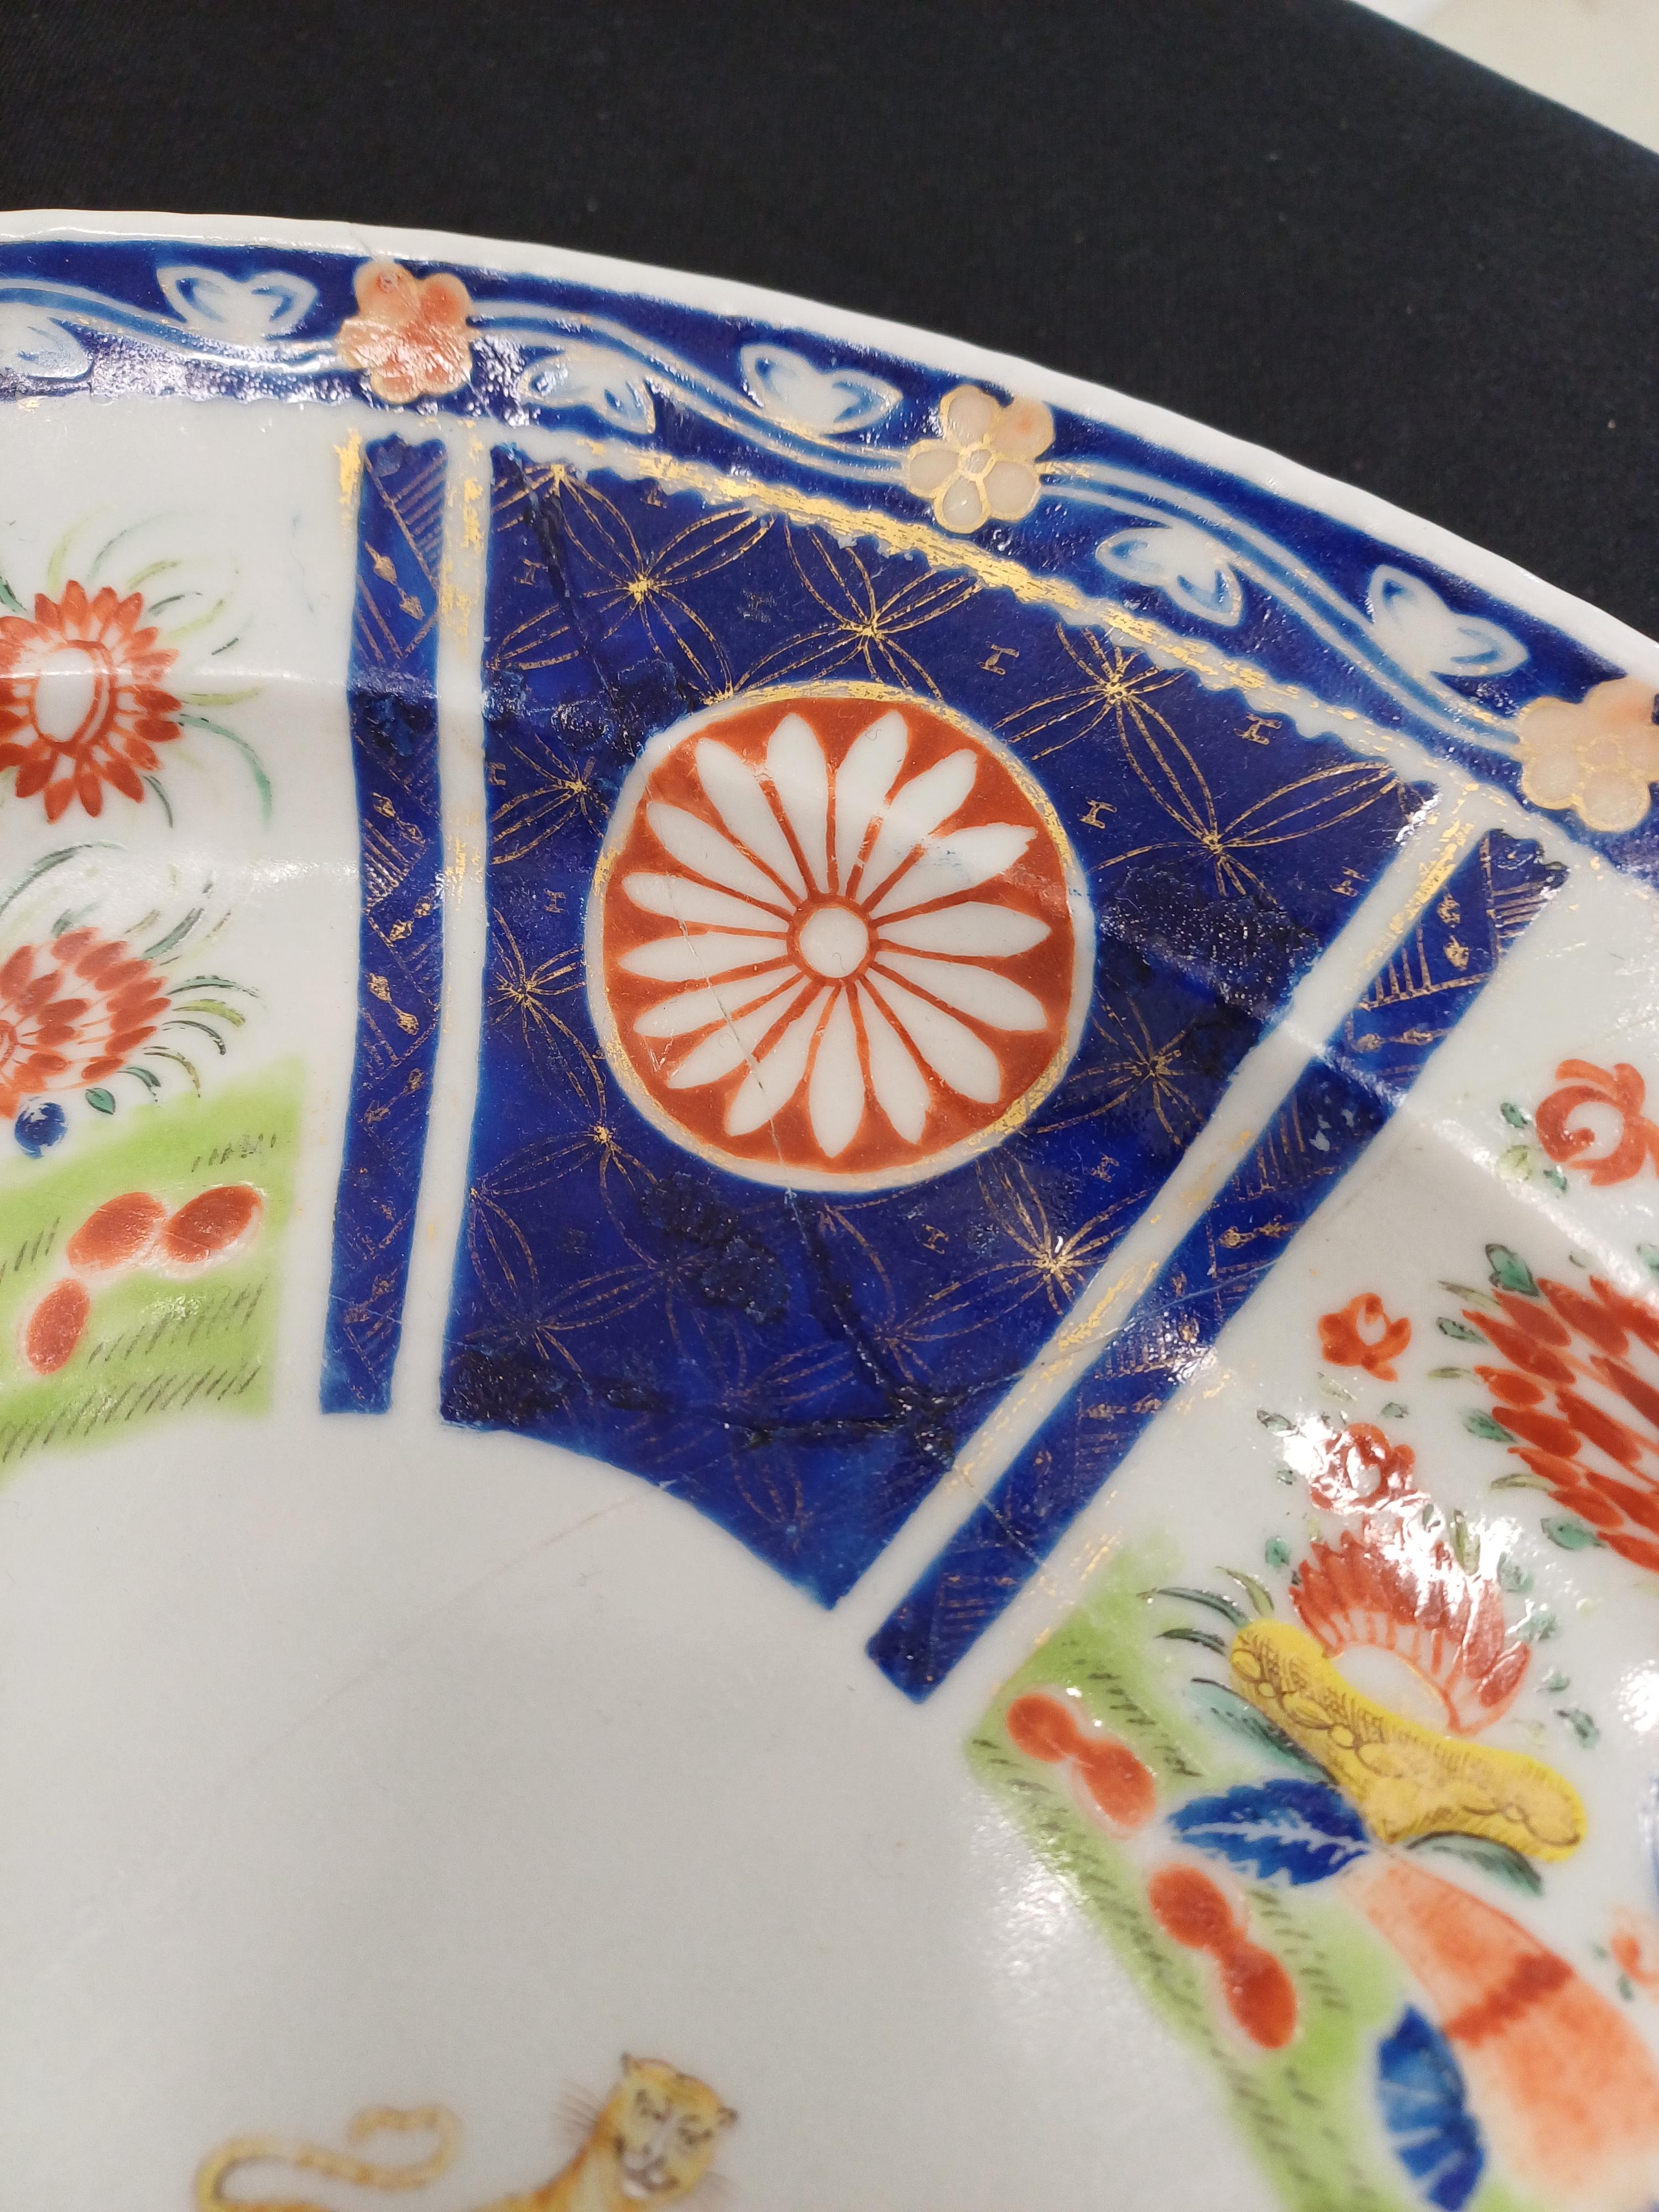 A CHINESE EXPORT ARMORIAL OVAL DISH FOR THE INDIAN MARKET 清十九世紀 約1820年 外銷粉彩繪徽章紋盤 - Image 3 of 7